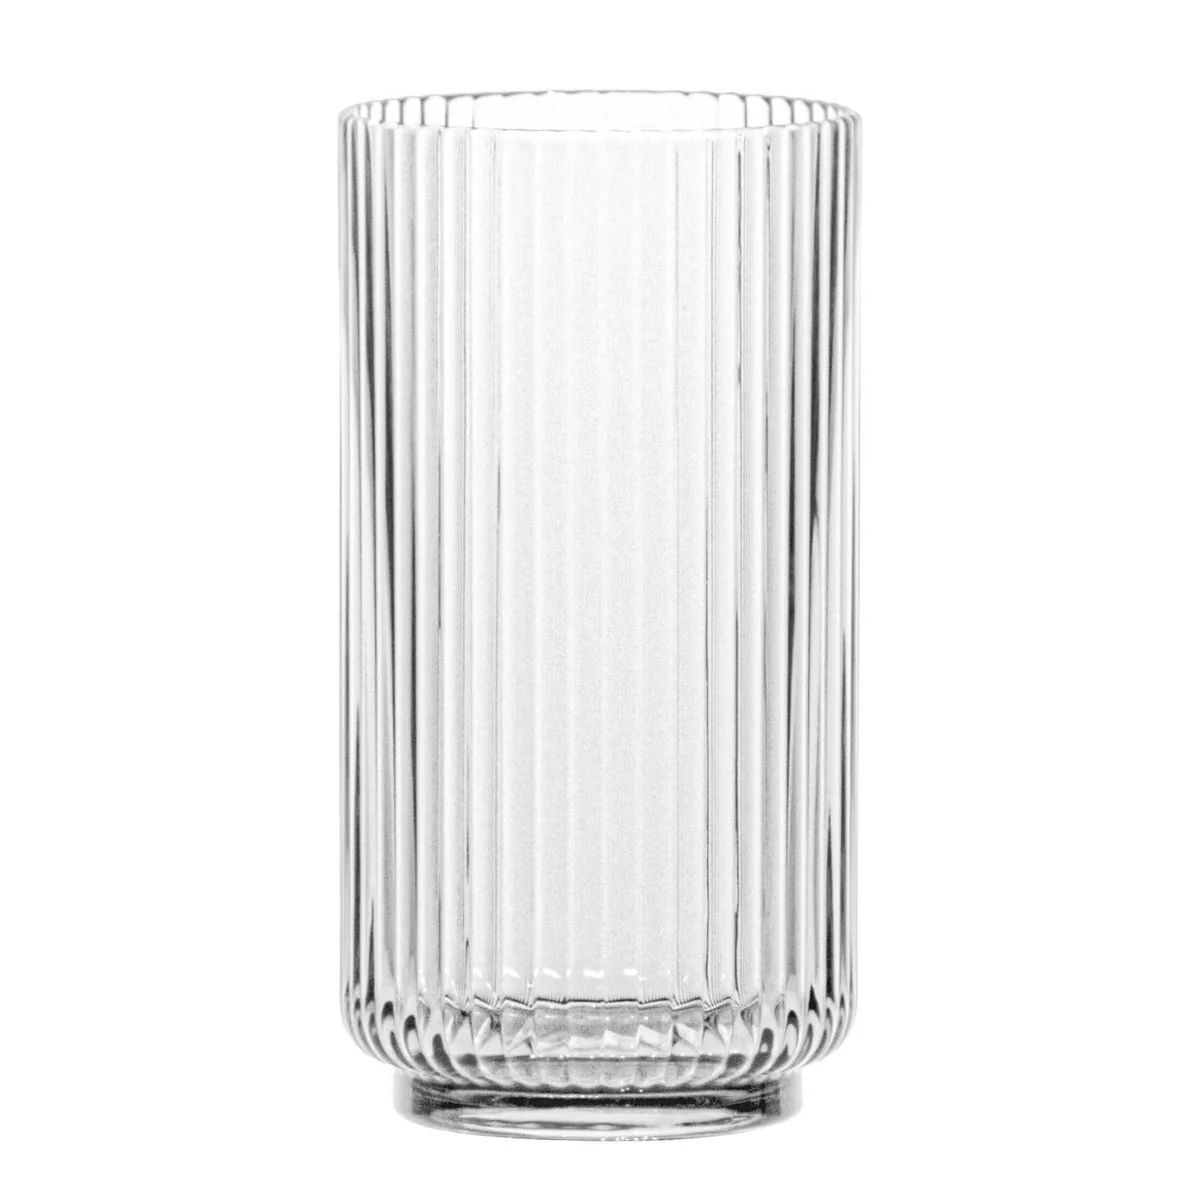 SHATTERPROOF DRINKING GLASS (SET OF 6) | Cooper at Home